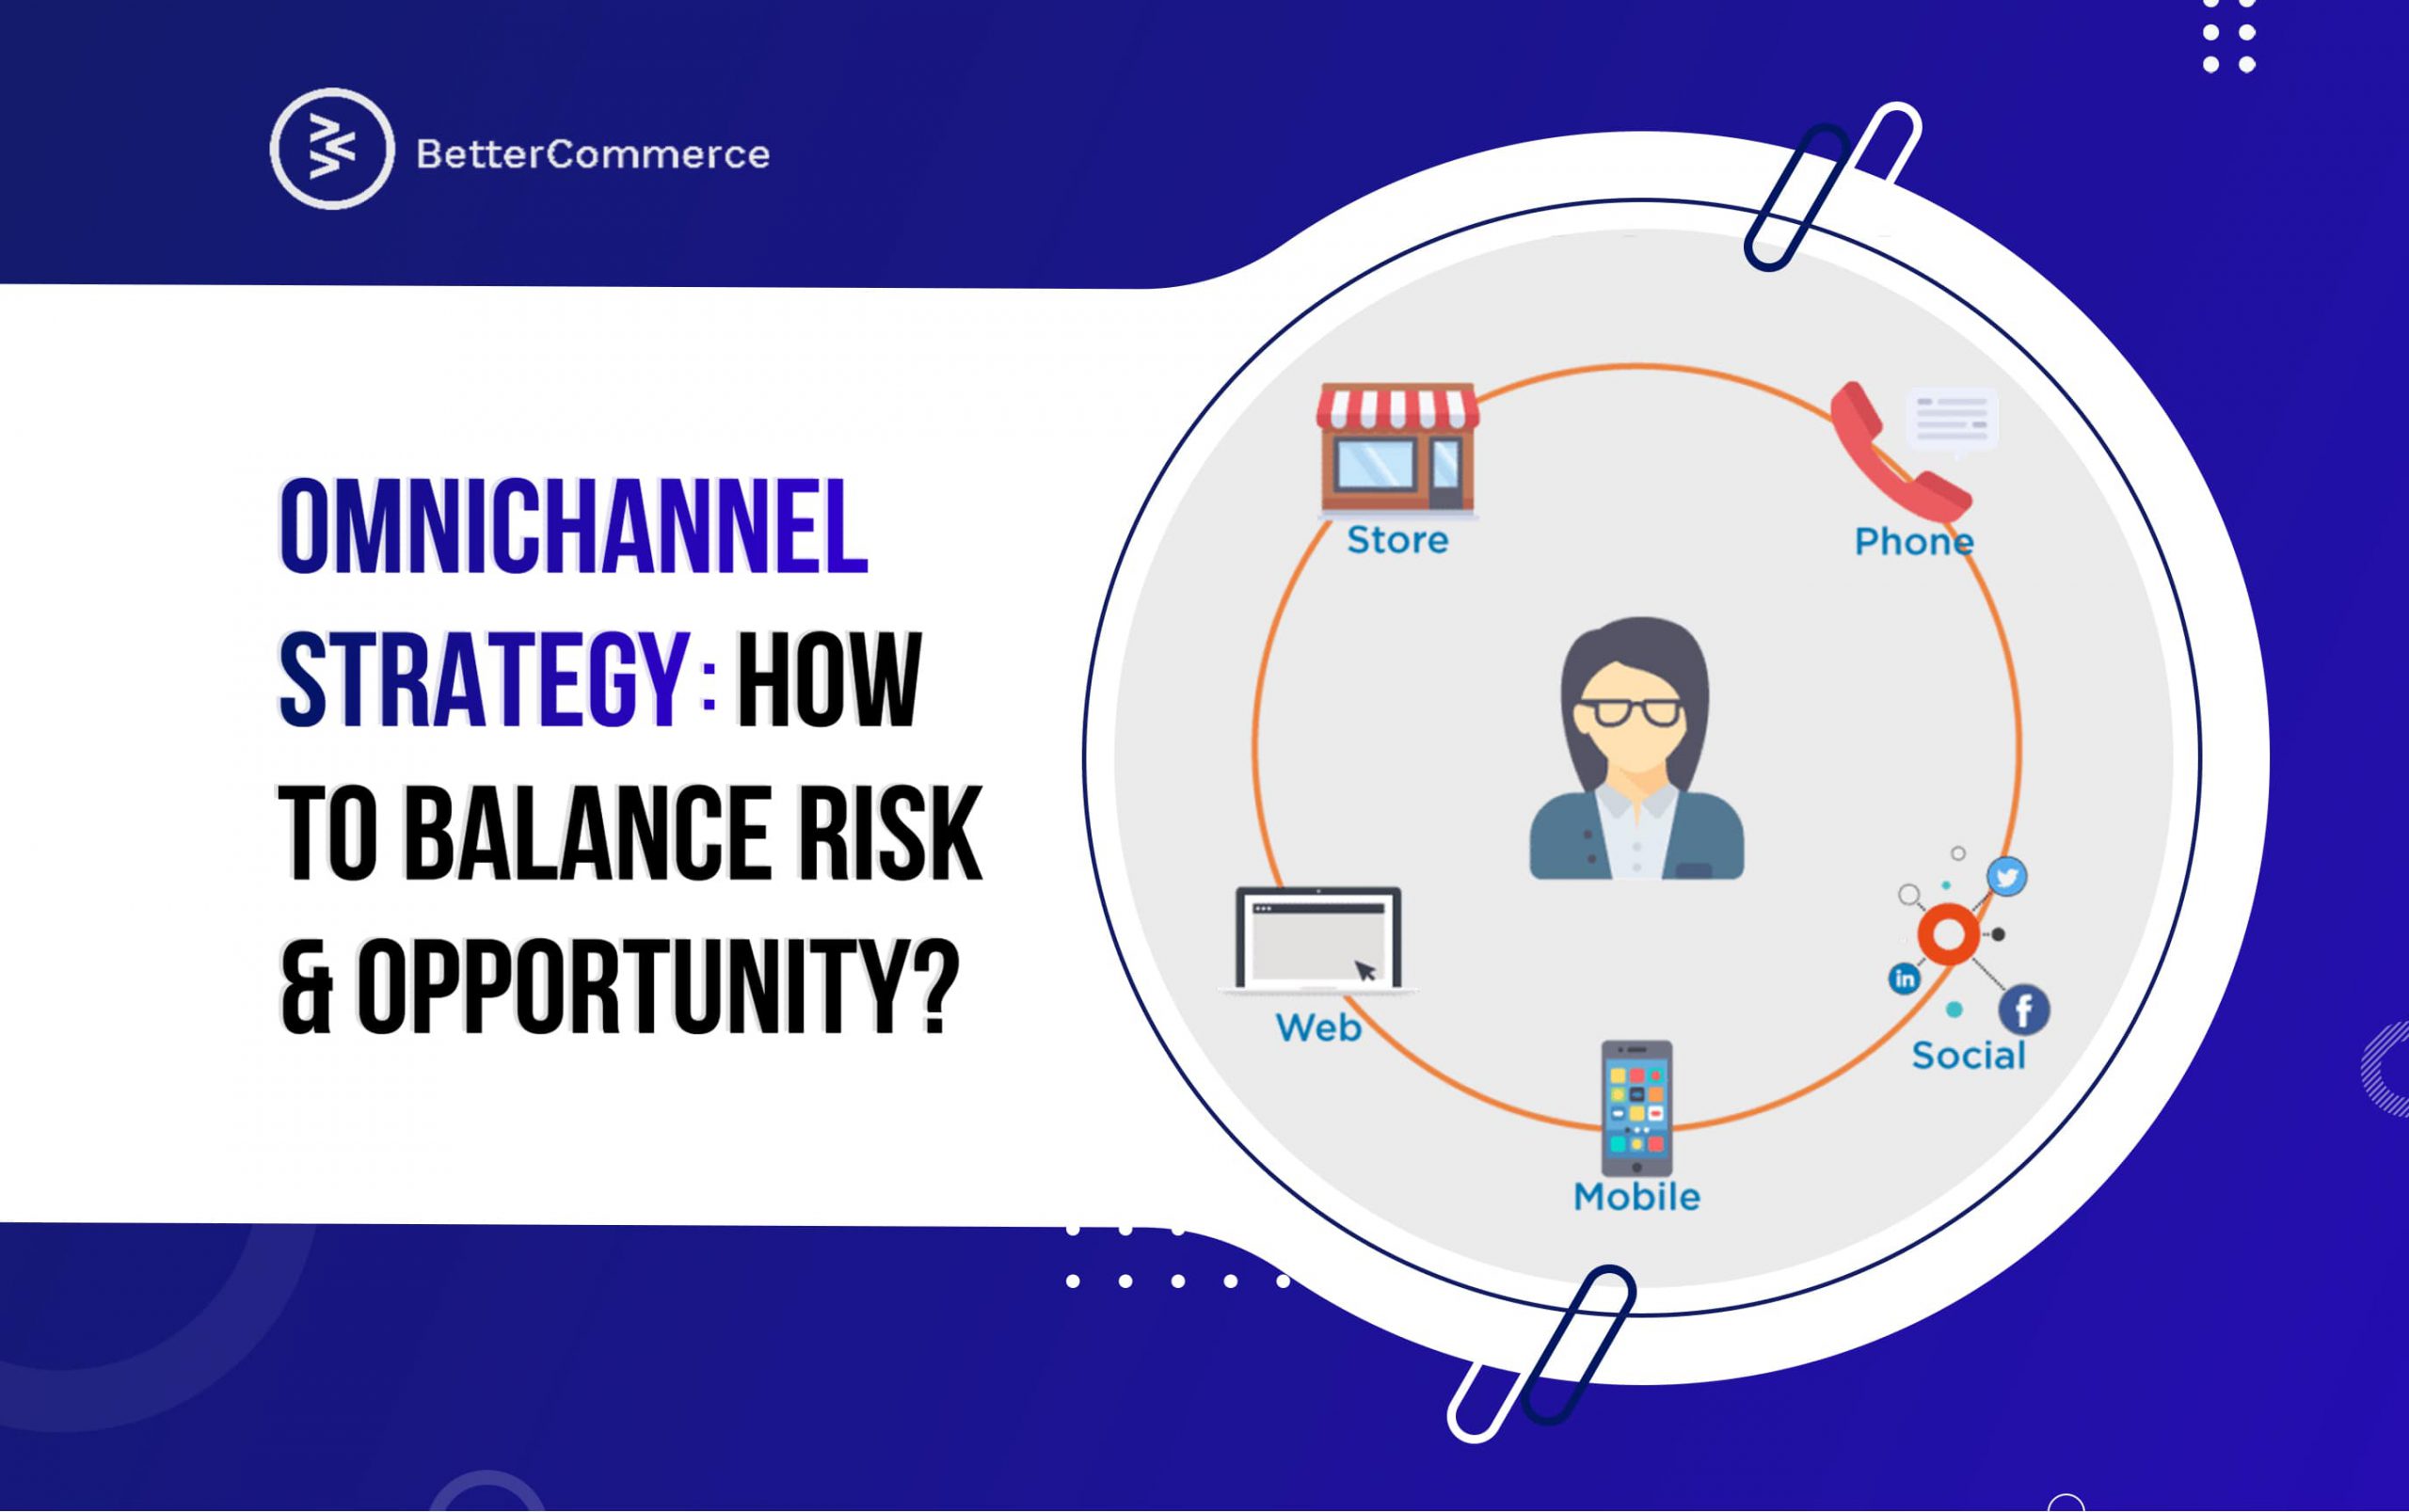 Omnichannel strategy: how to balance risk and opportunity?